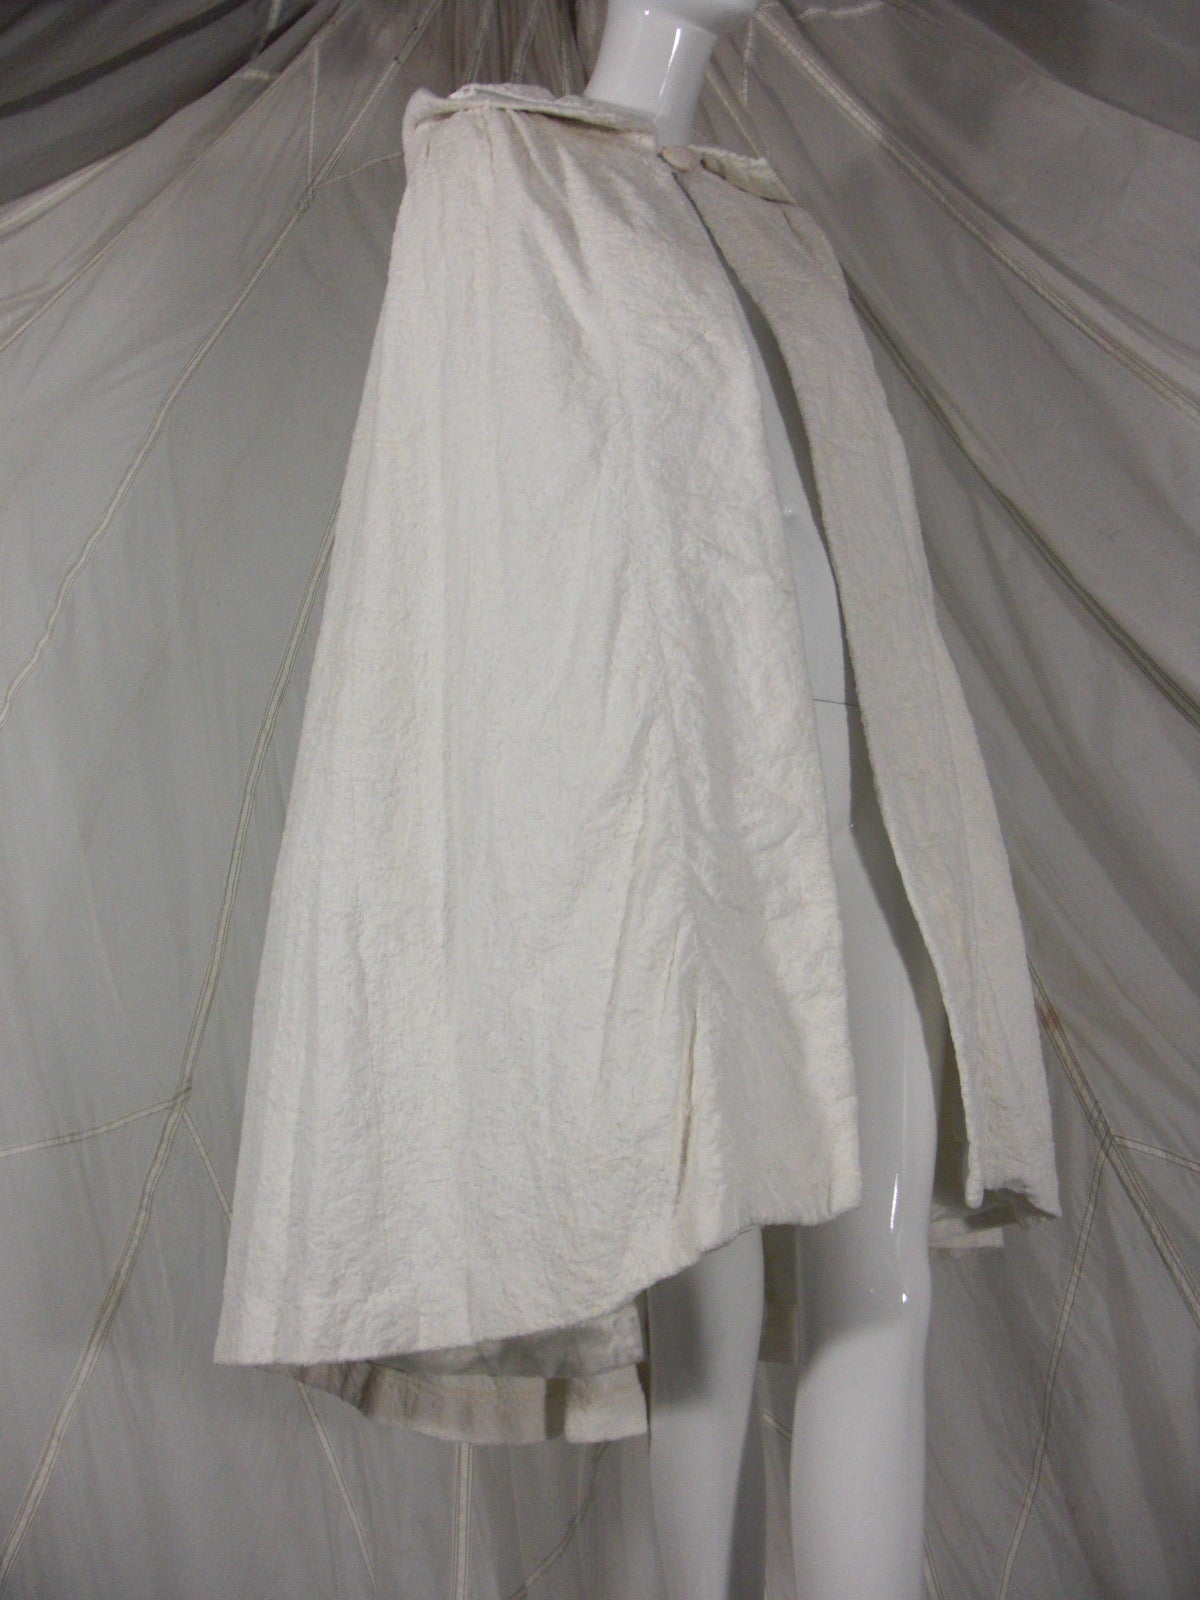 1940s Russel Gowns White Crushed Velvet Cape with Hood

Satin Lining Full Swing